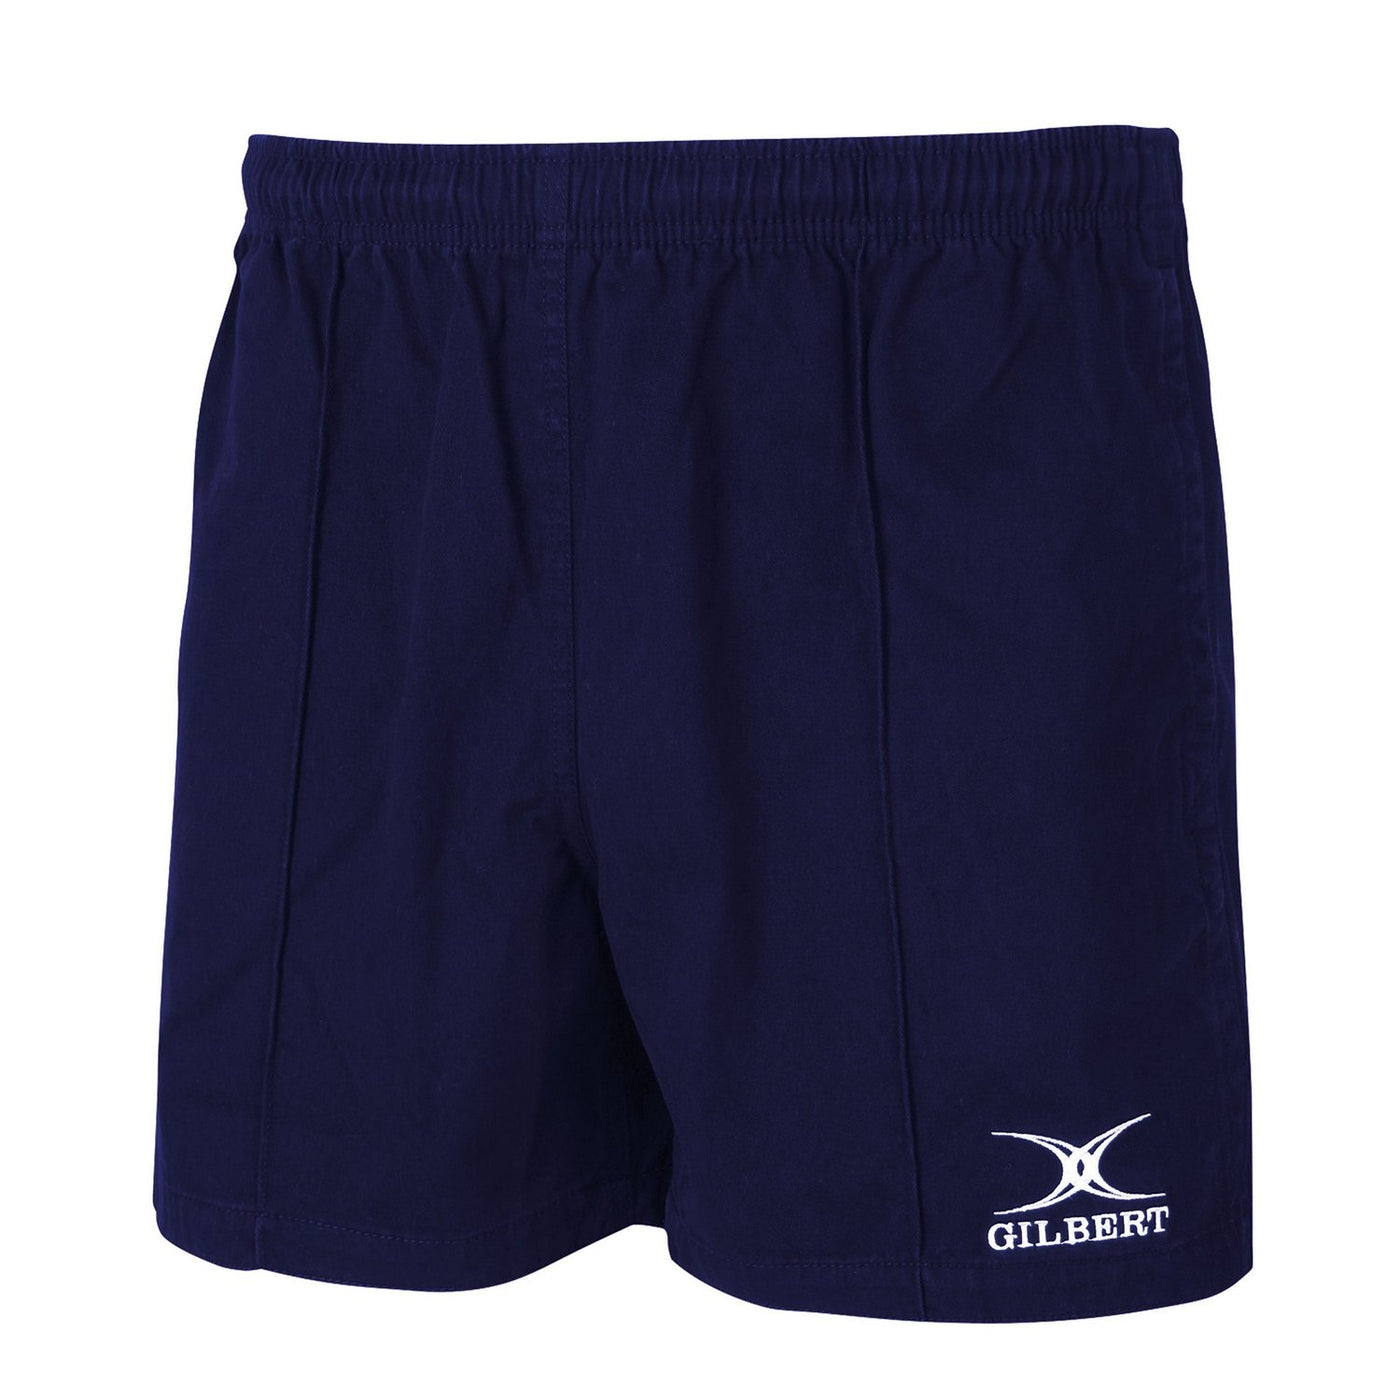 Kiwi Pro Rugby Short Navy (with pockets)